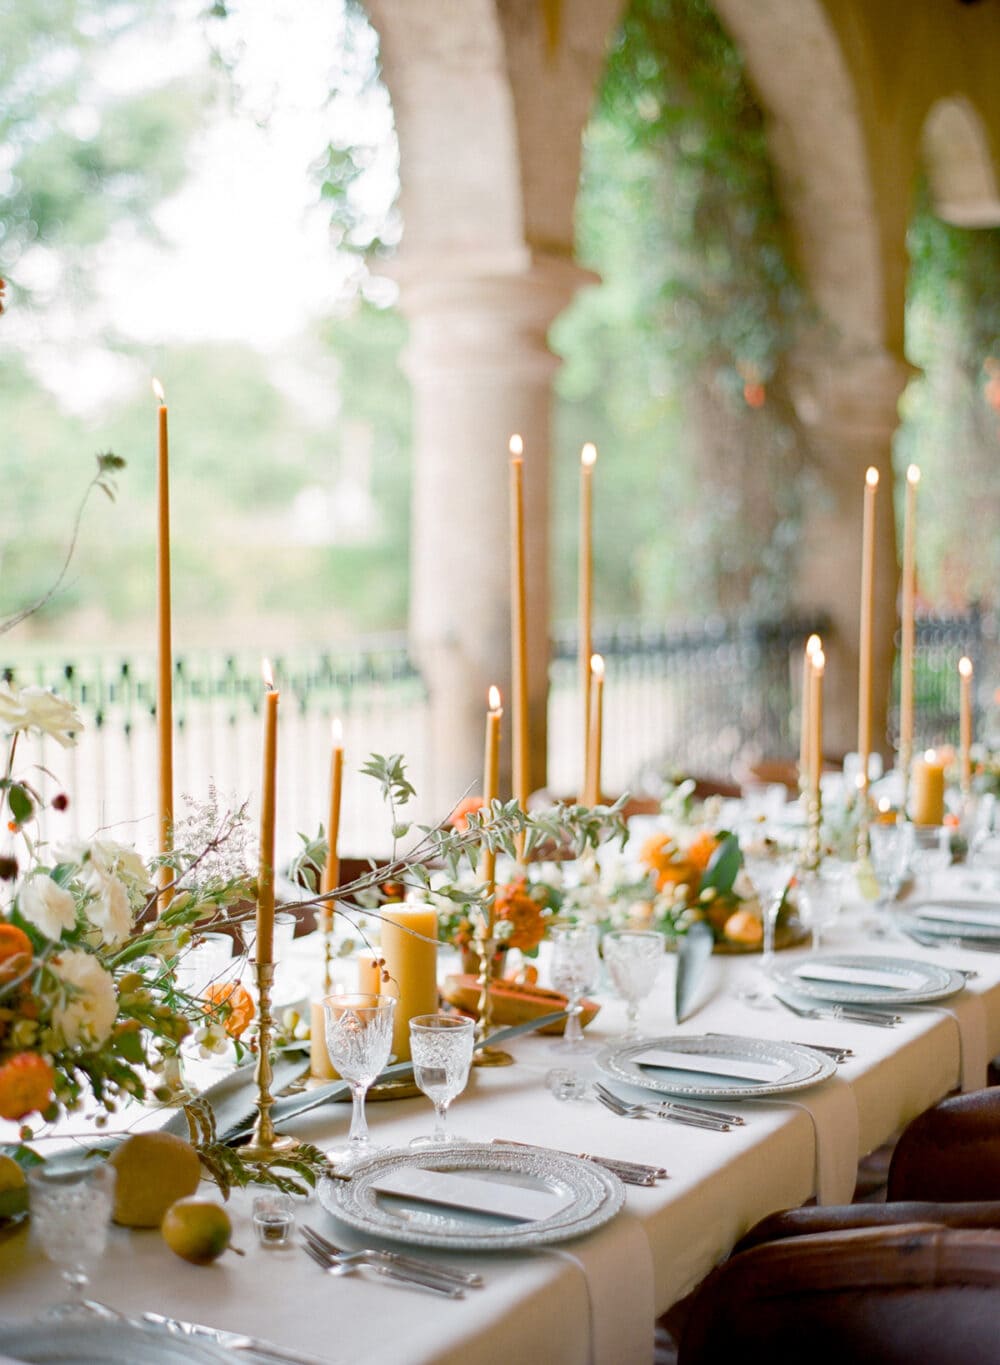 An outdoor Thanksgiving tablescape featuring soft amber colors. Tapered candles in a mustard color, groups of fall florals spread throughout the center of the table. Beautiful white layered dishes.